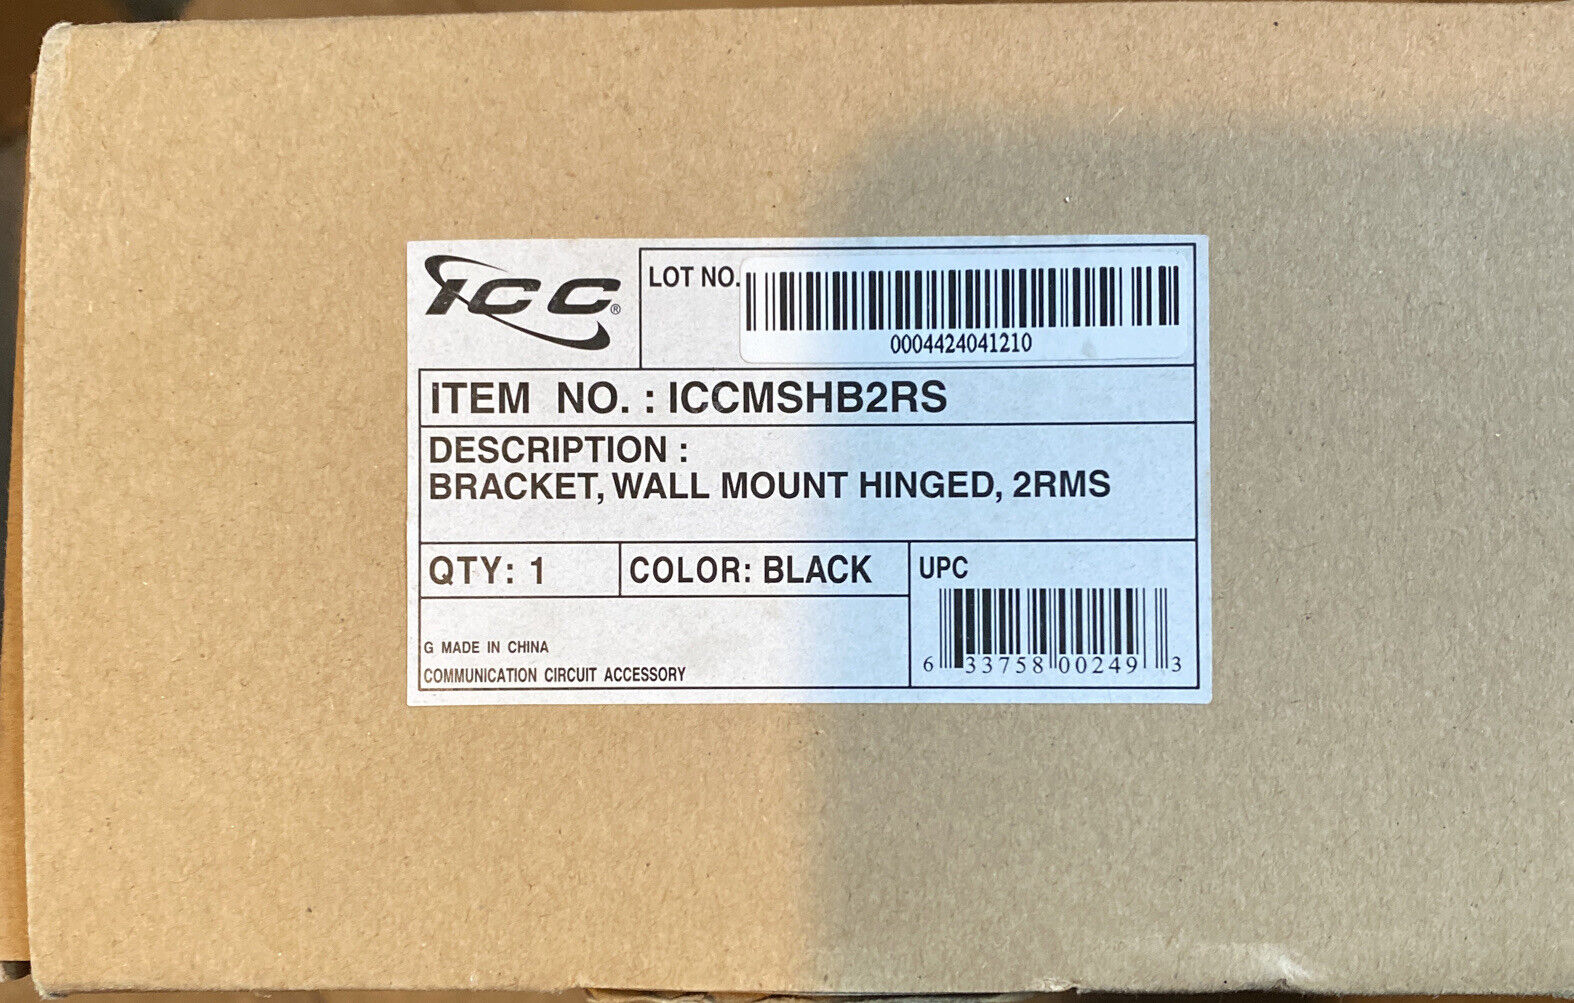 ICC ICCMSHB2RS BRACKET, WALL MOUNT HINGED, 2 RMS